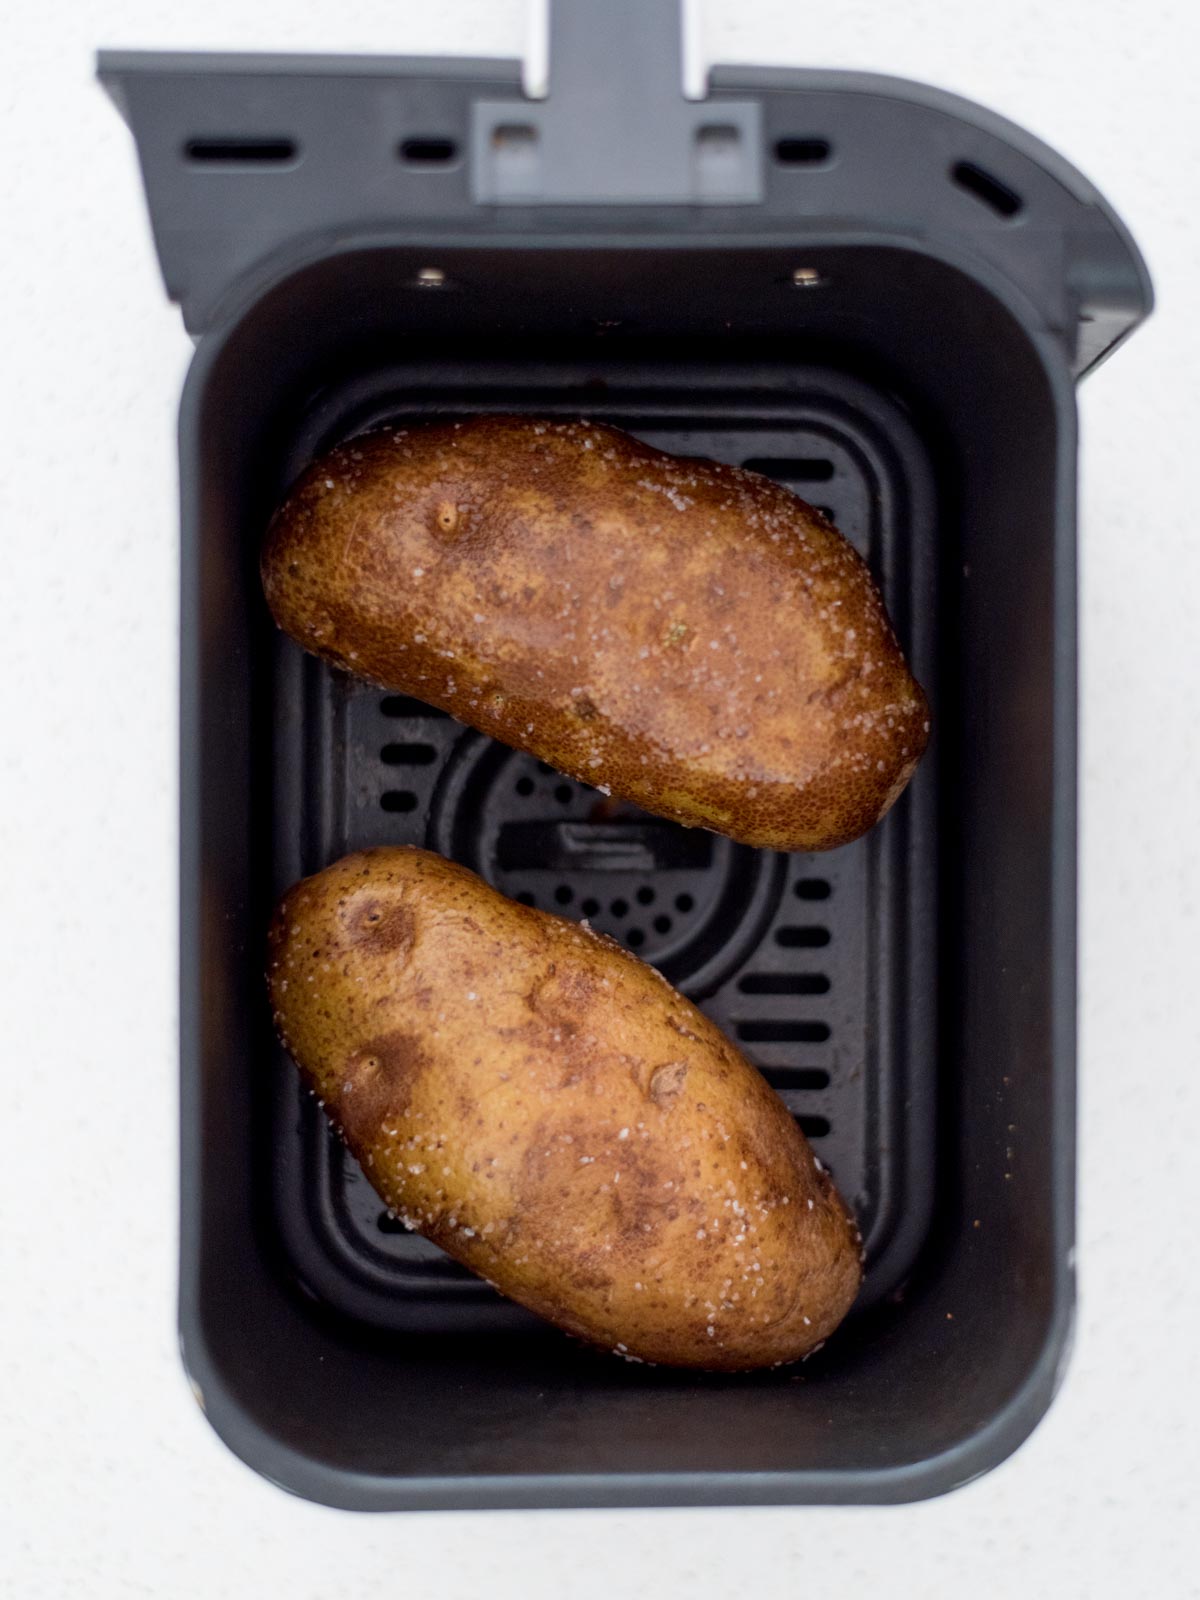 Two whole potatoes inside an air fryer.